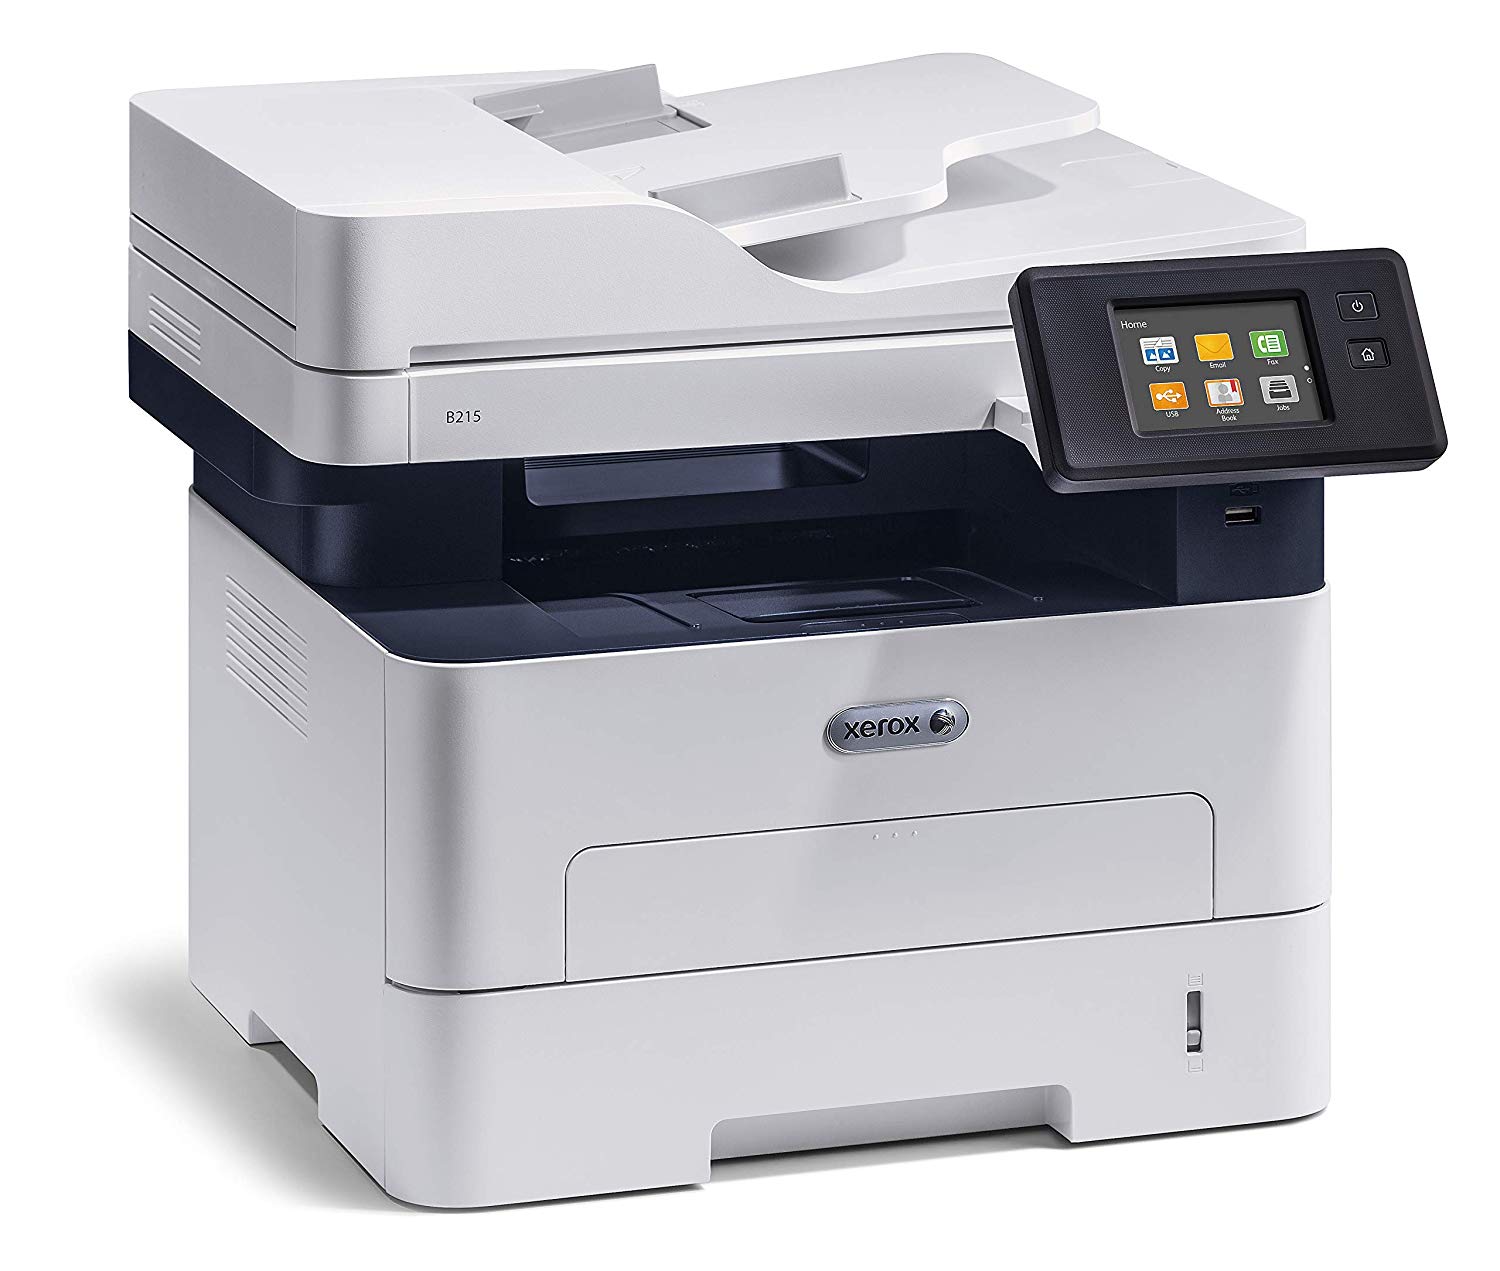 Top 8 Best Xerox Multifunction Printers of 2022 - Reviews and Comparison